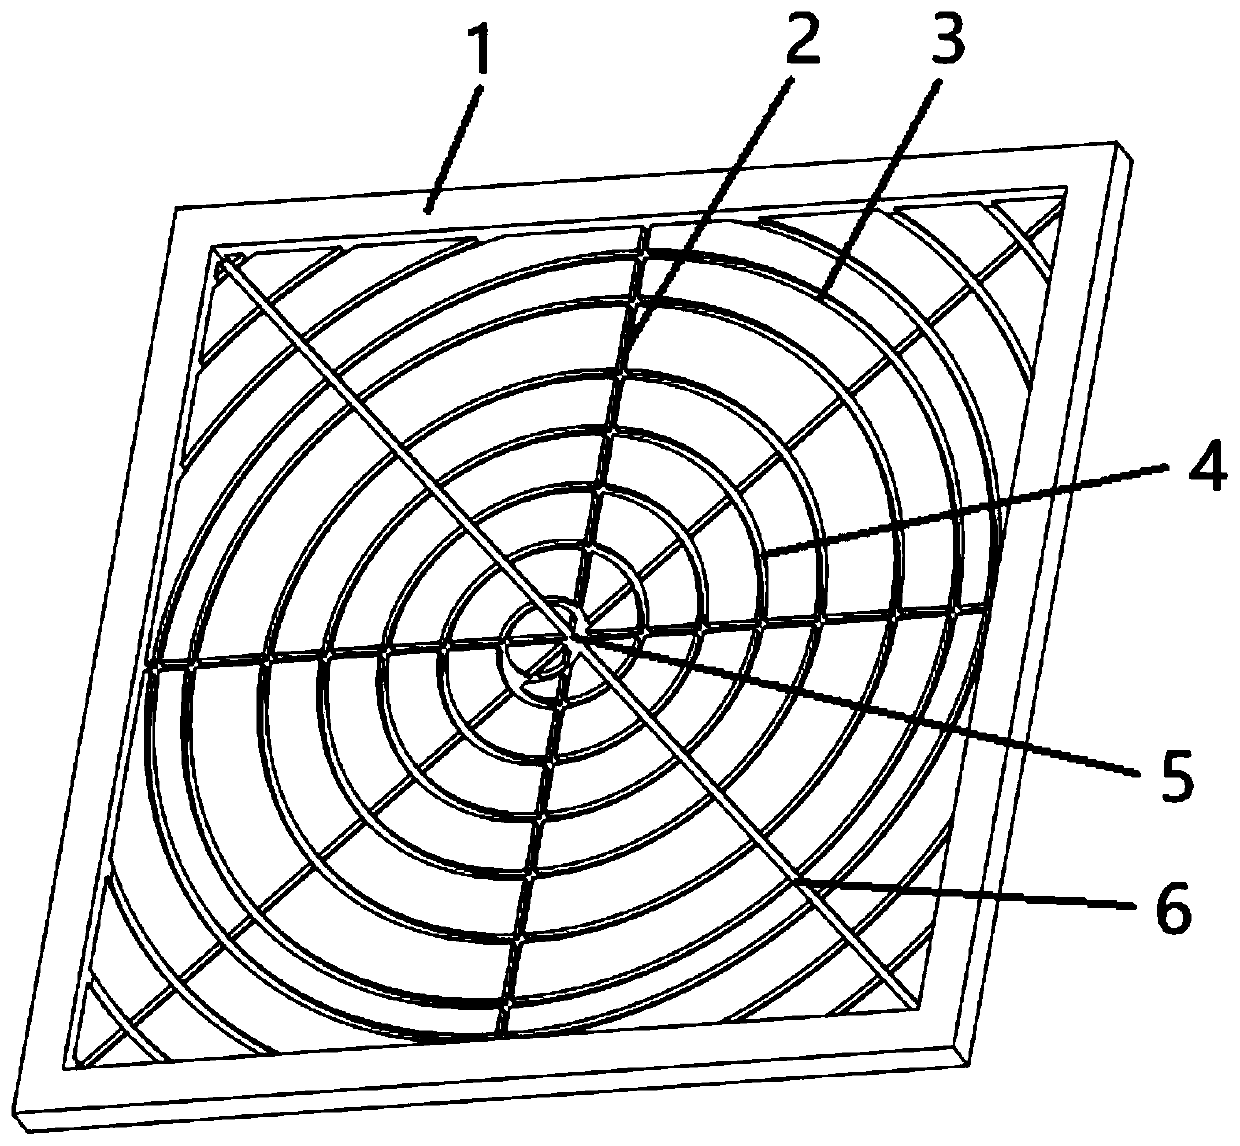 Bionic liquid absorption core with cobweb structure and soaking plate using same